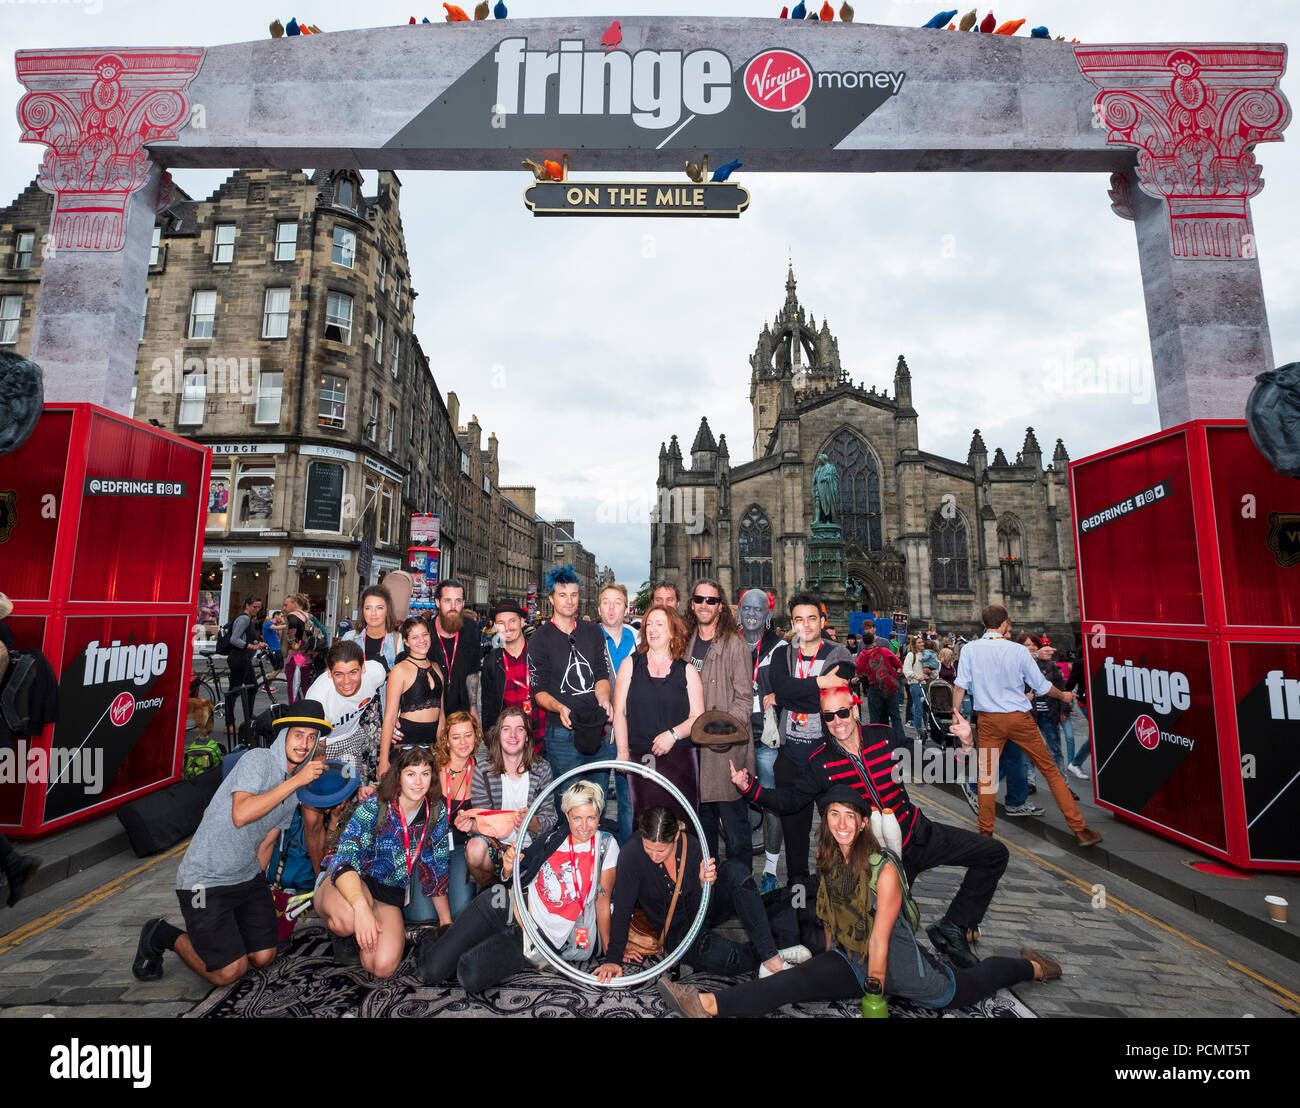 Edinburgh, Scotland, UK; 3 August, 2018. Official Opening of the new Virgin Money Fringe Street Events on the Royal Mile in Edinburgh. Performers and Shona McCarthy Chief Executive of the Edinburgh Fringe Society gather to cut the red ribbon and open this year's Fringe Festival. Credit: Iain Masterton/Alamy Live News Stock Photo